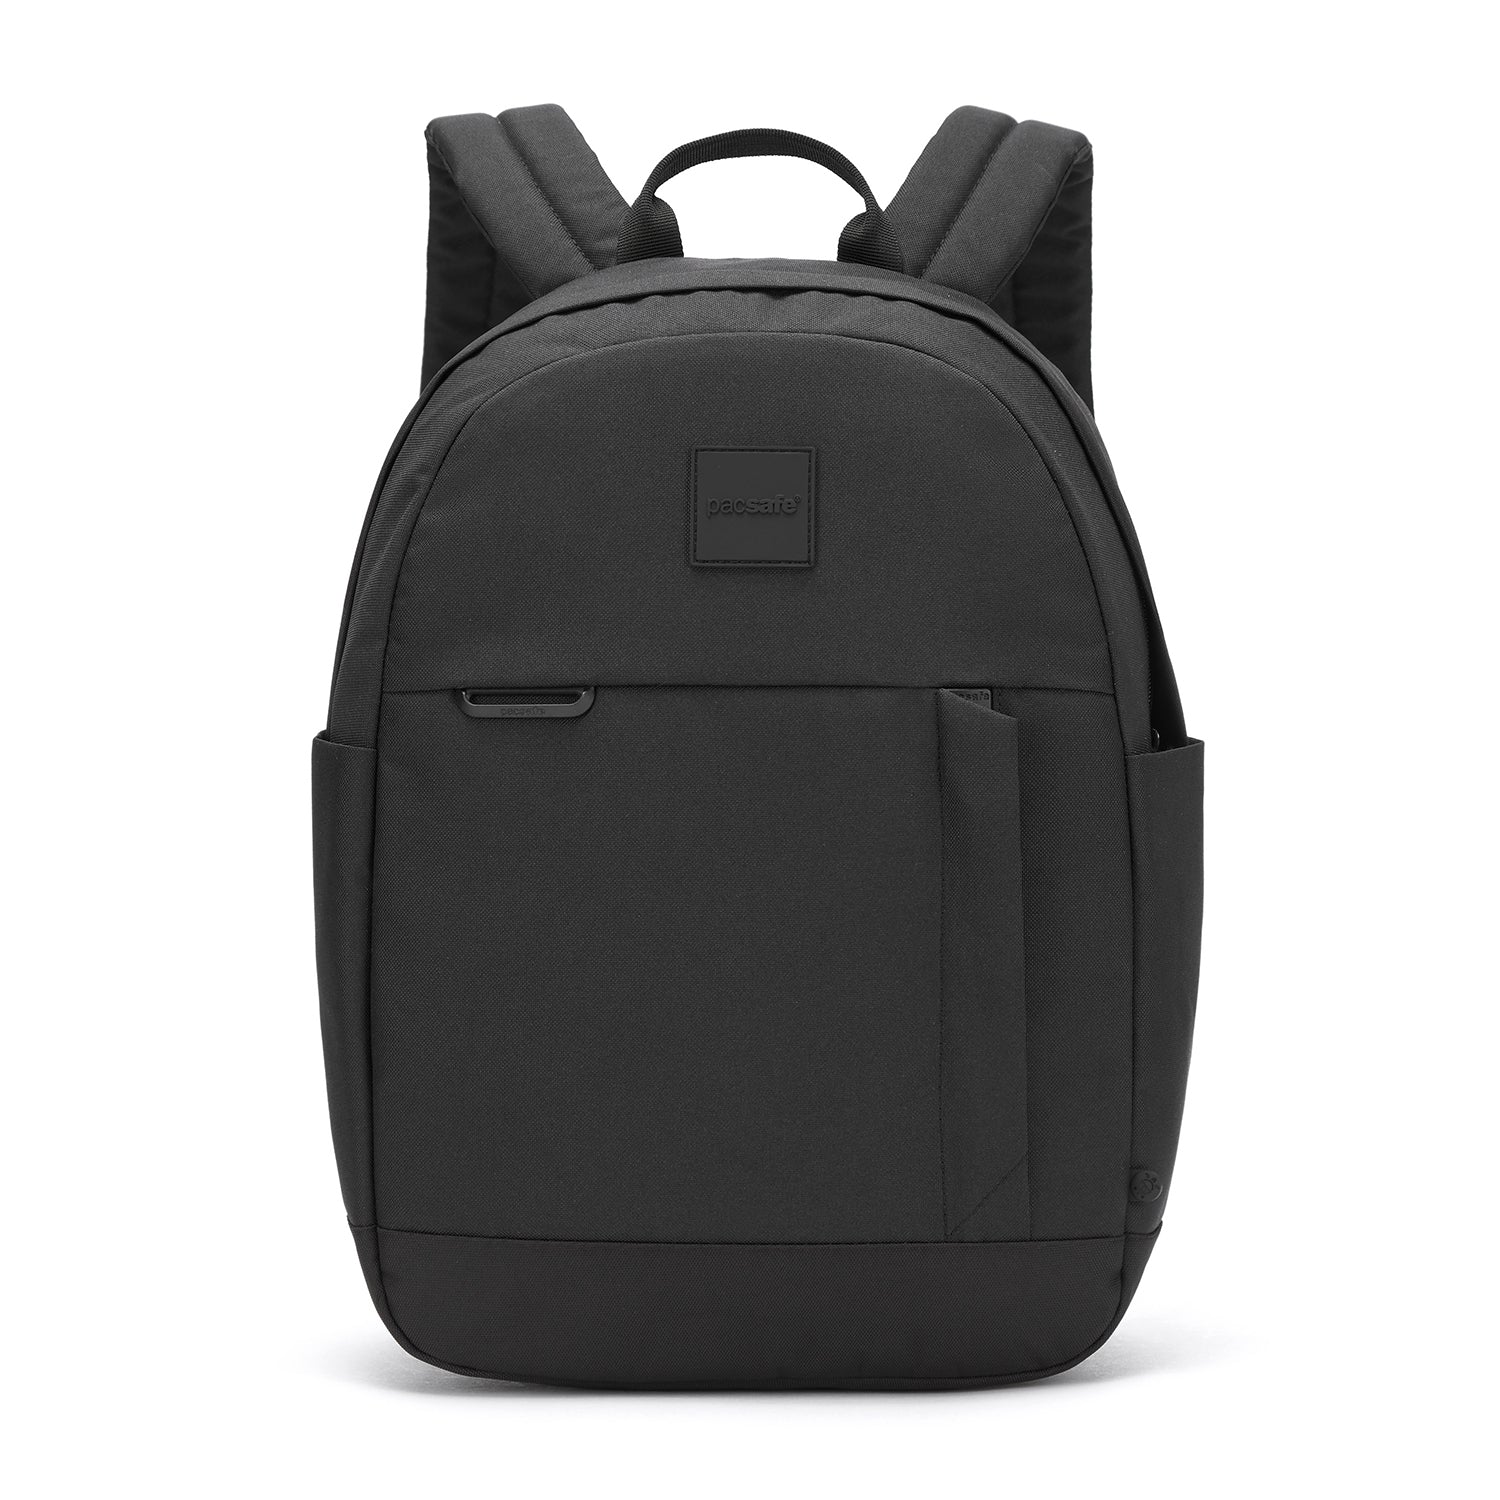 Pacsafe® Go 15L Anti-Theft Backpack